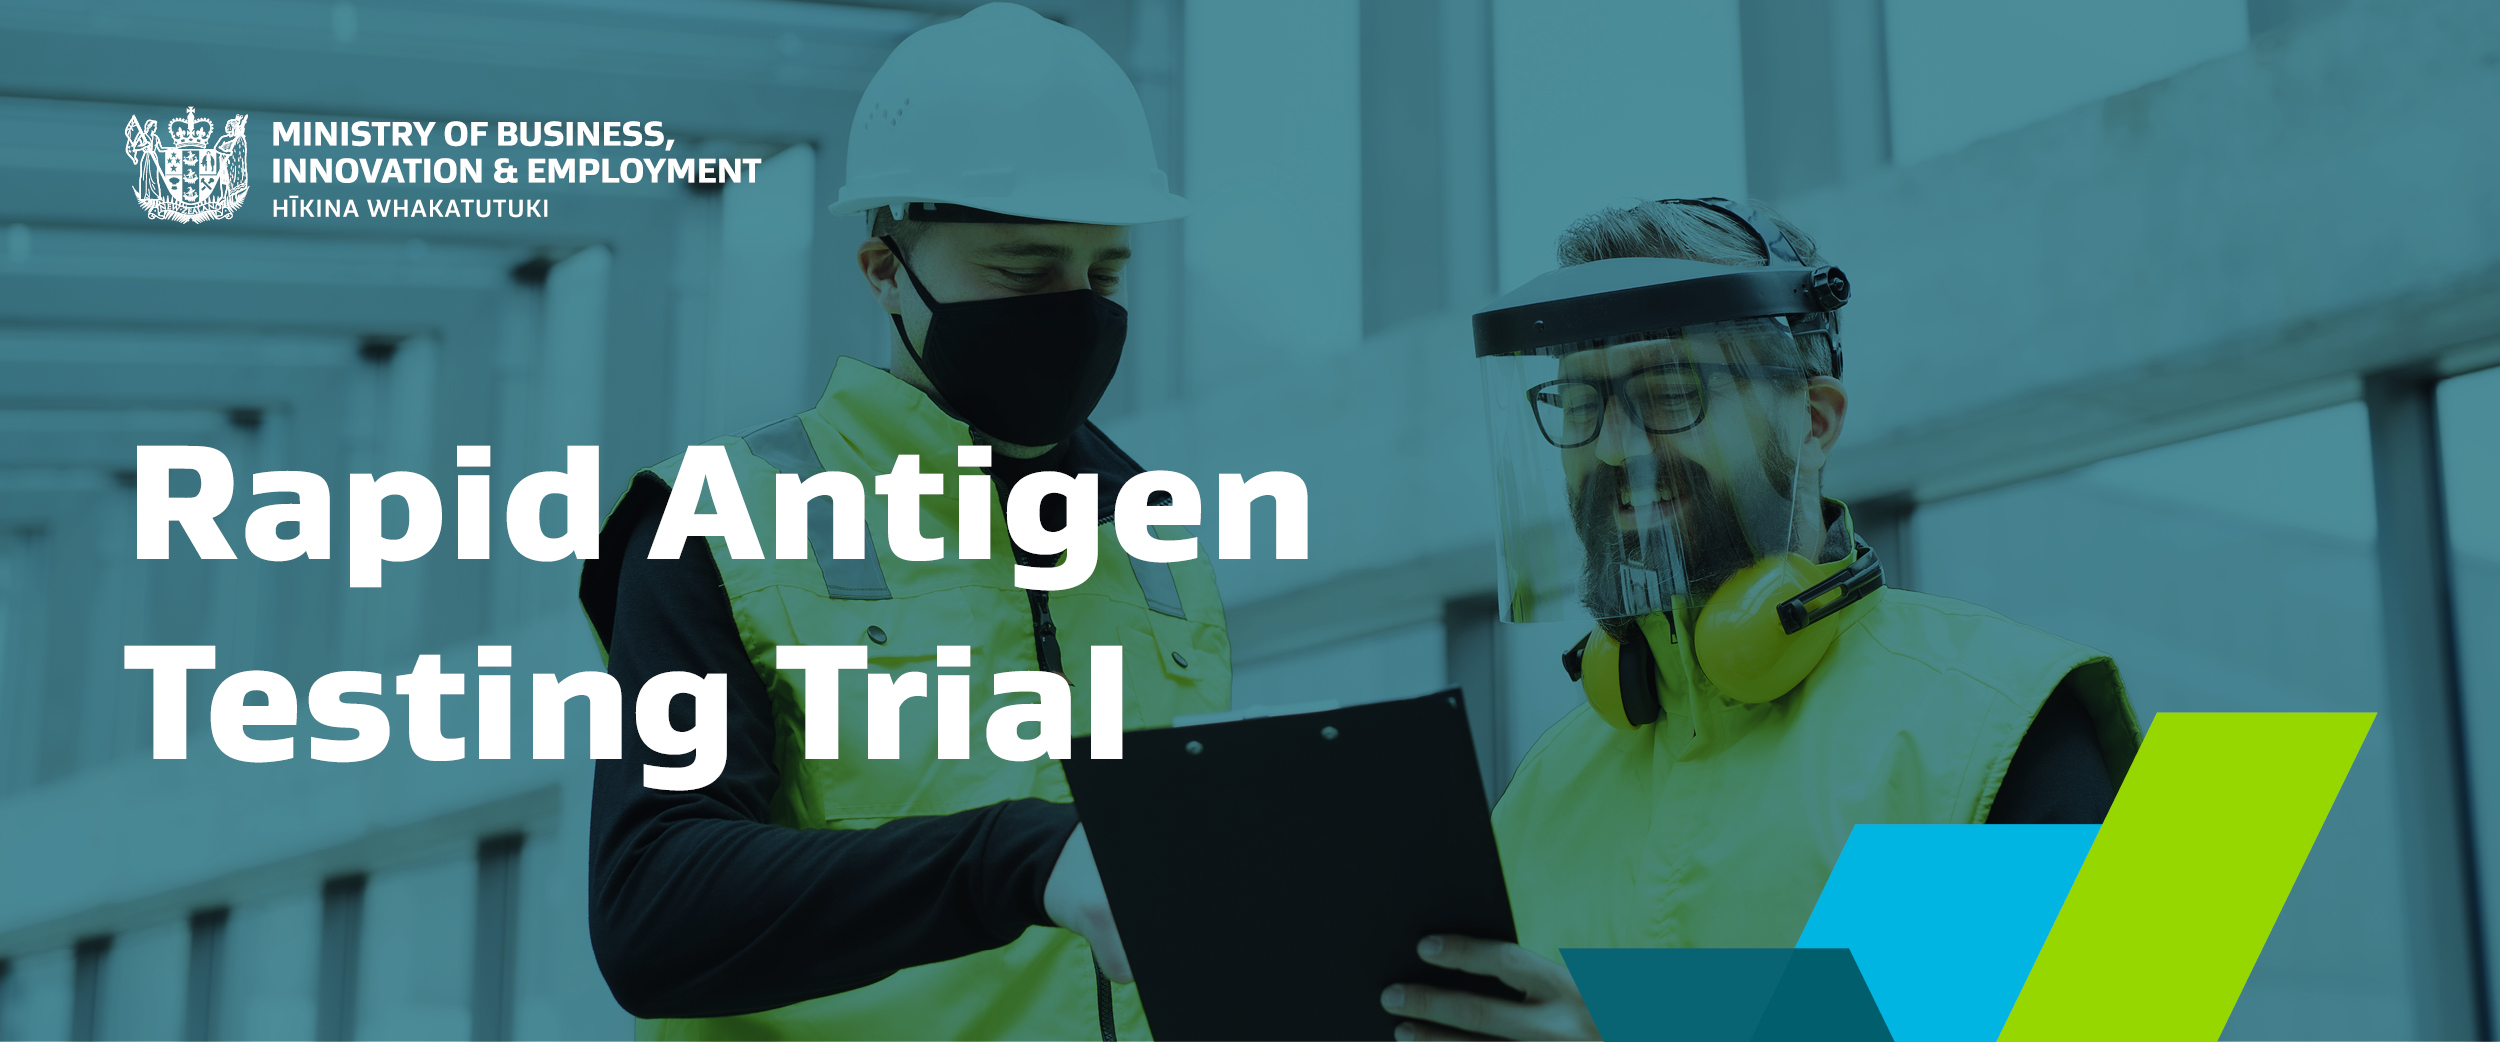 Image of two workers in high vis wearing PPE with the text "Rapid Antigen Testing Trial".